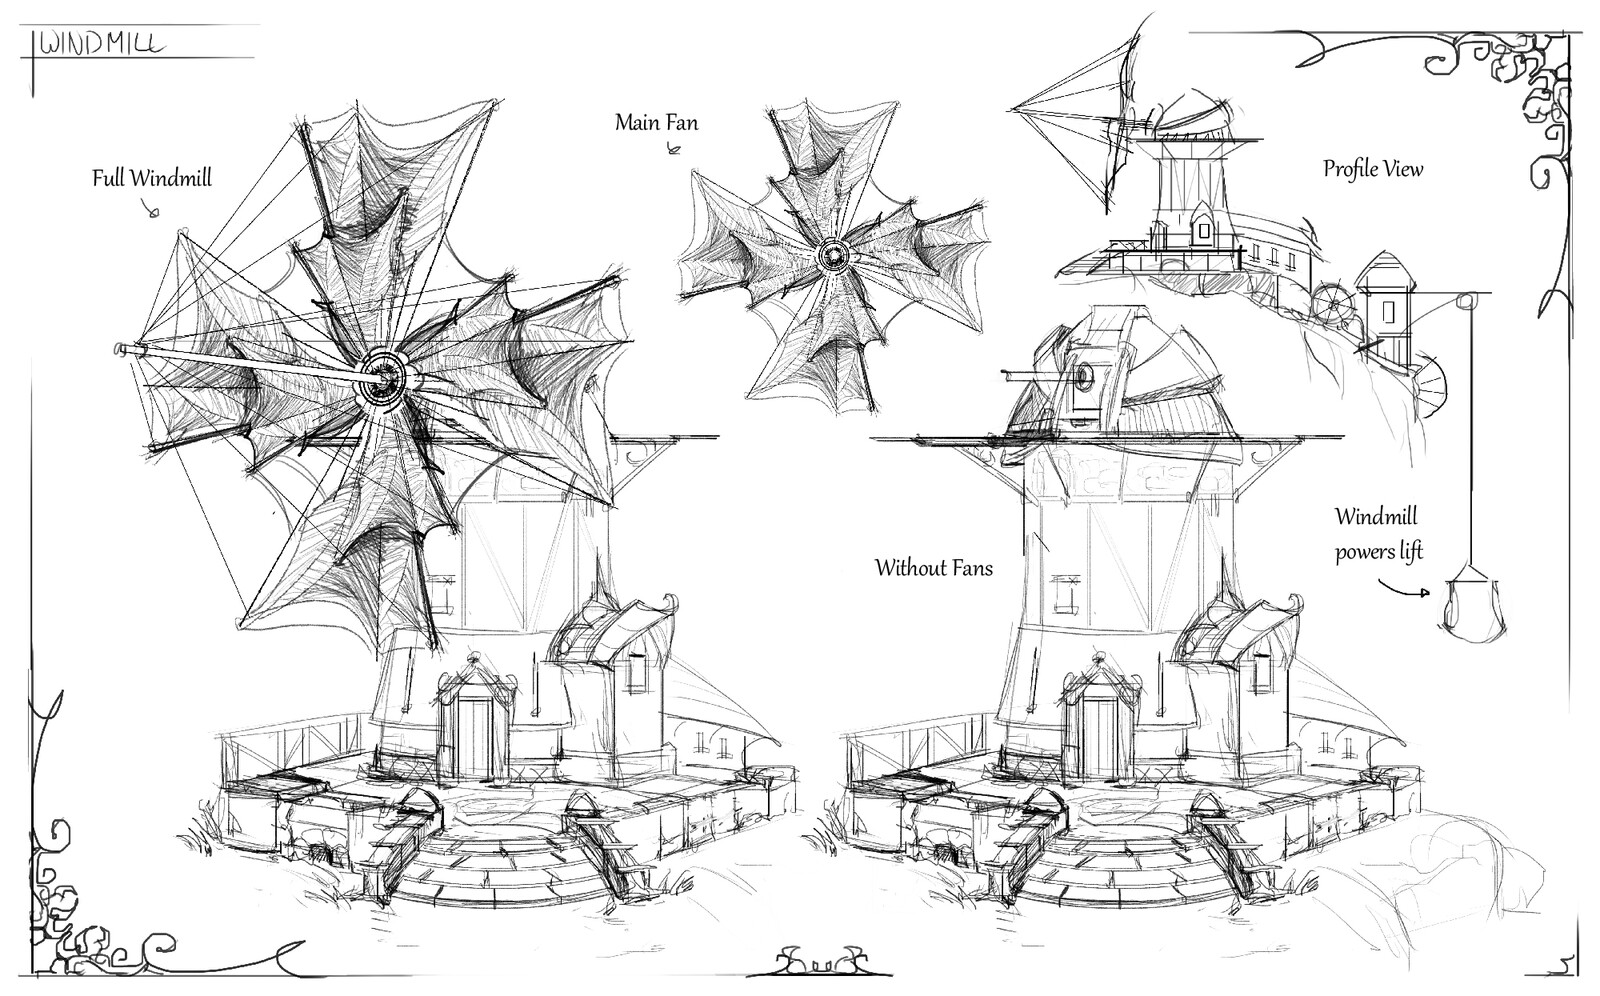 Early design of the windmill